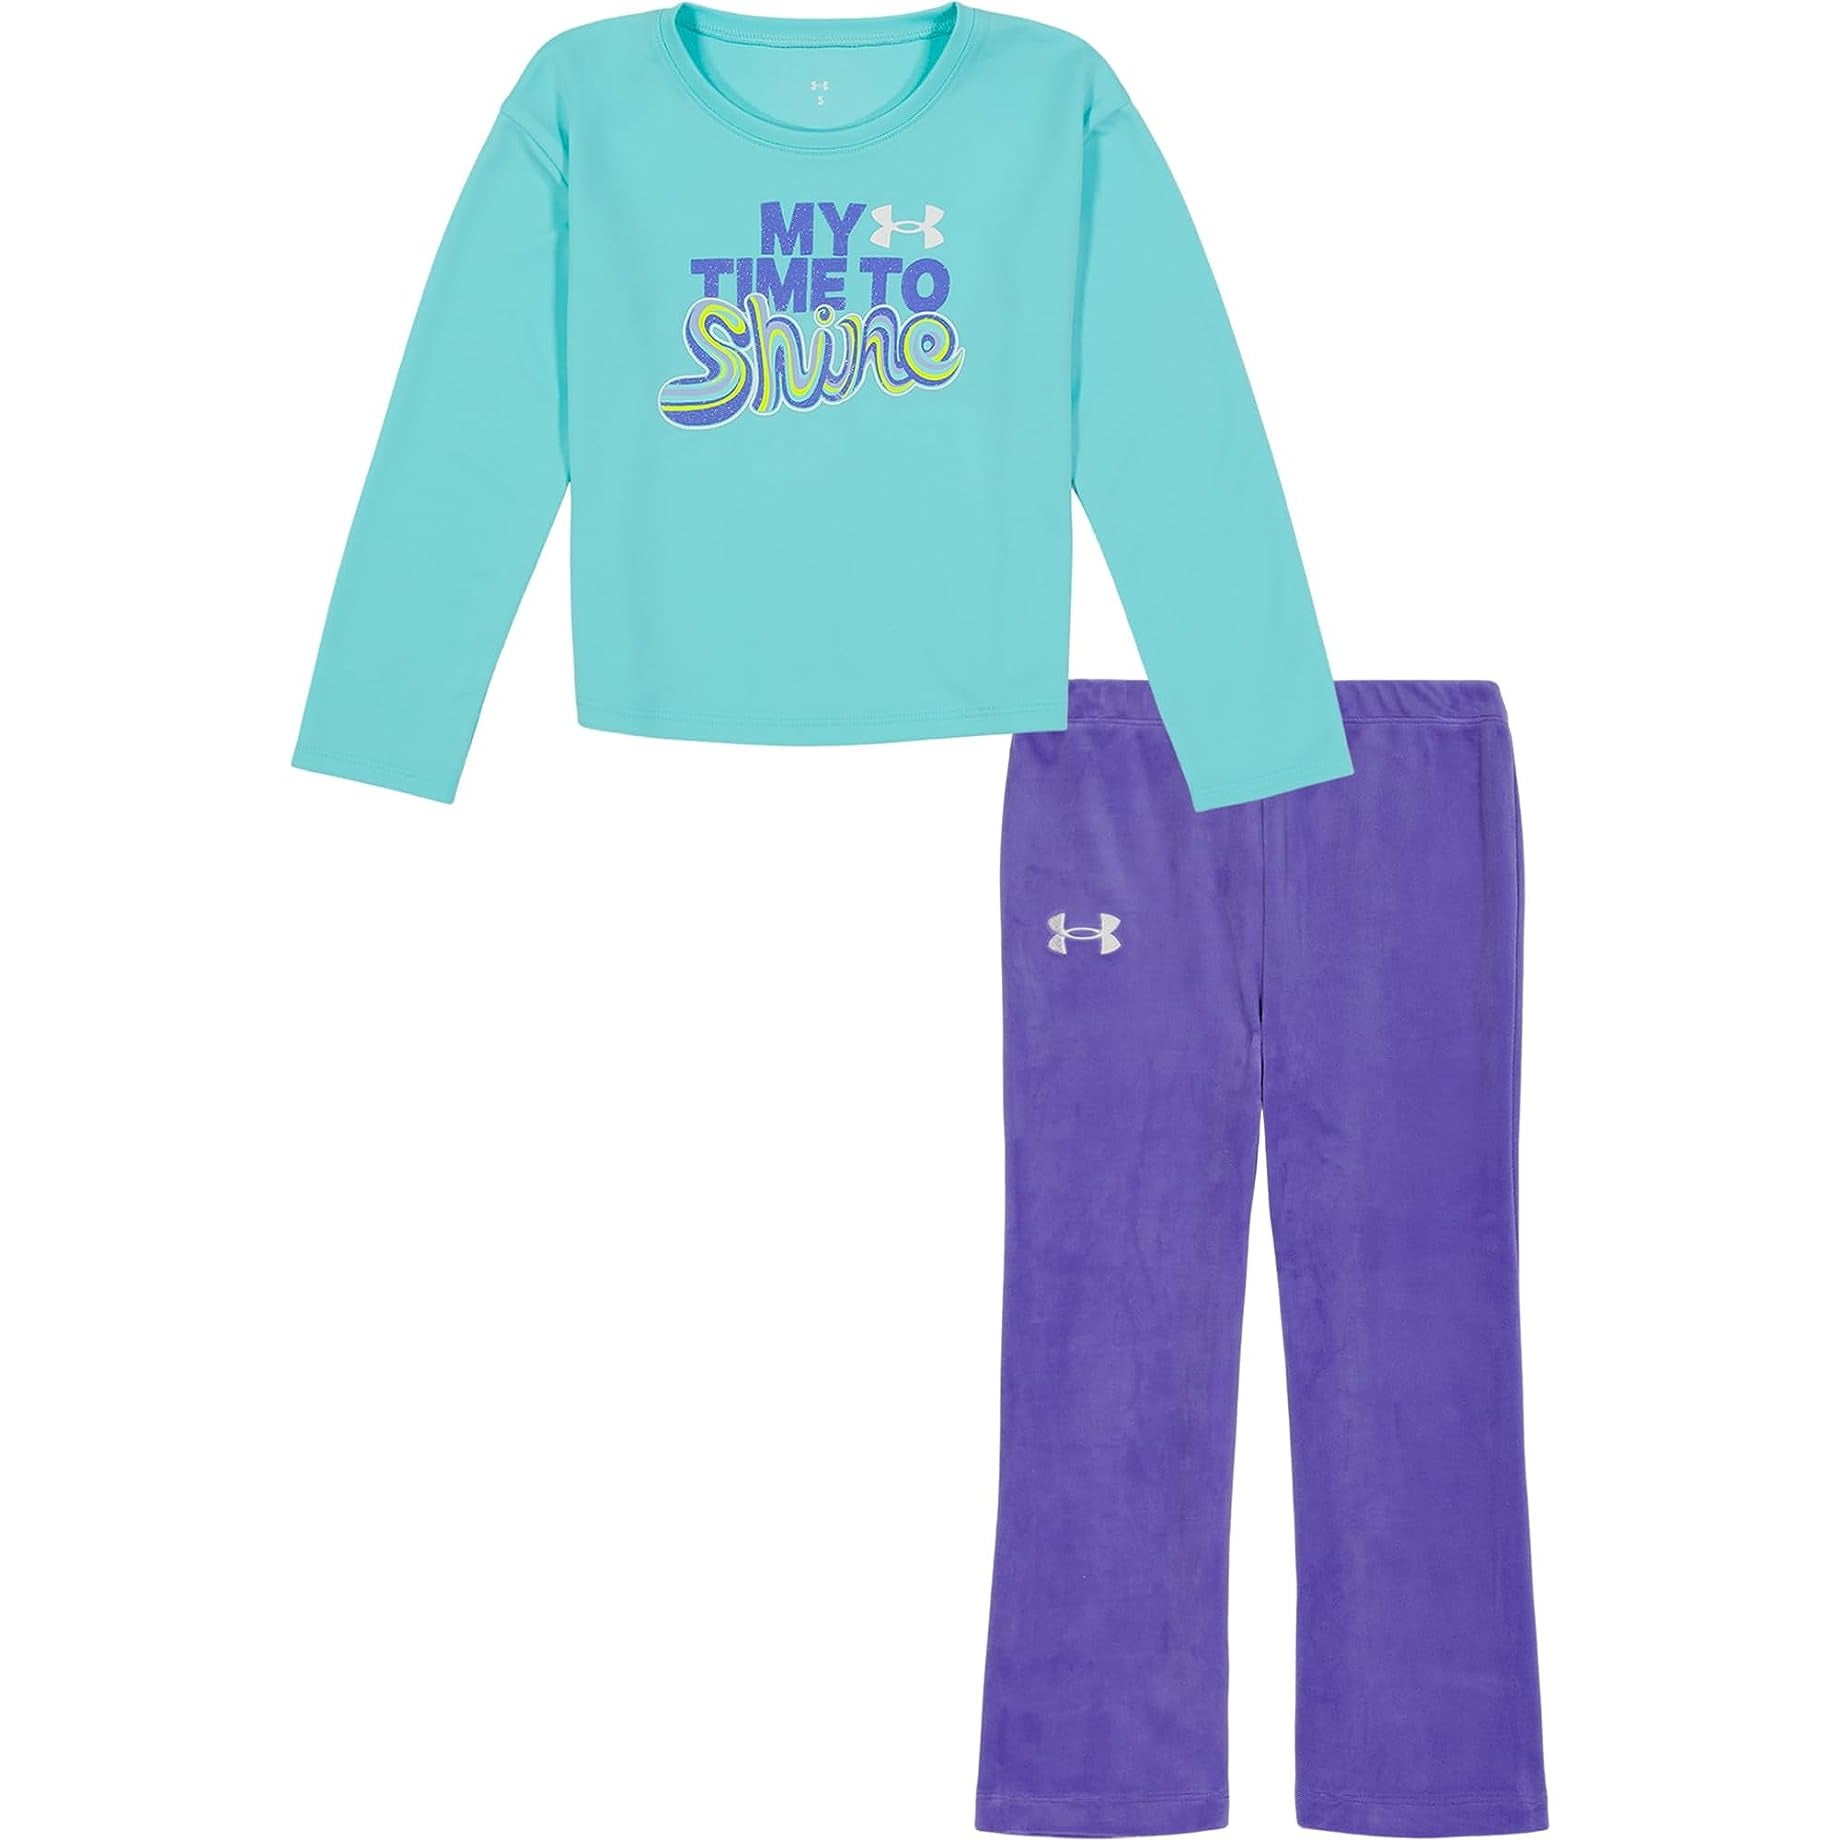 Under Armour Baby Girls' UA My Time to Shine Set - Neo Turquoise-UNDER ARMOUR-Little Giant Kidz